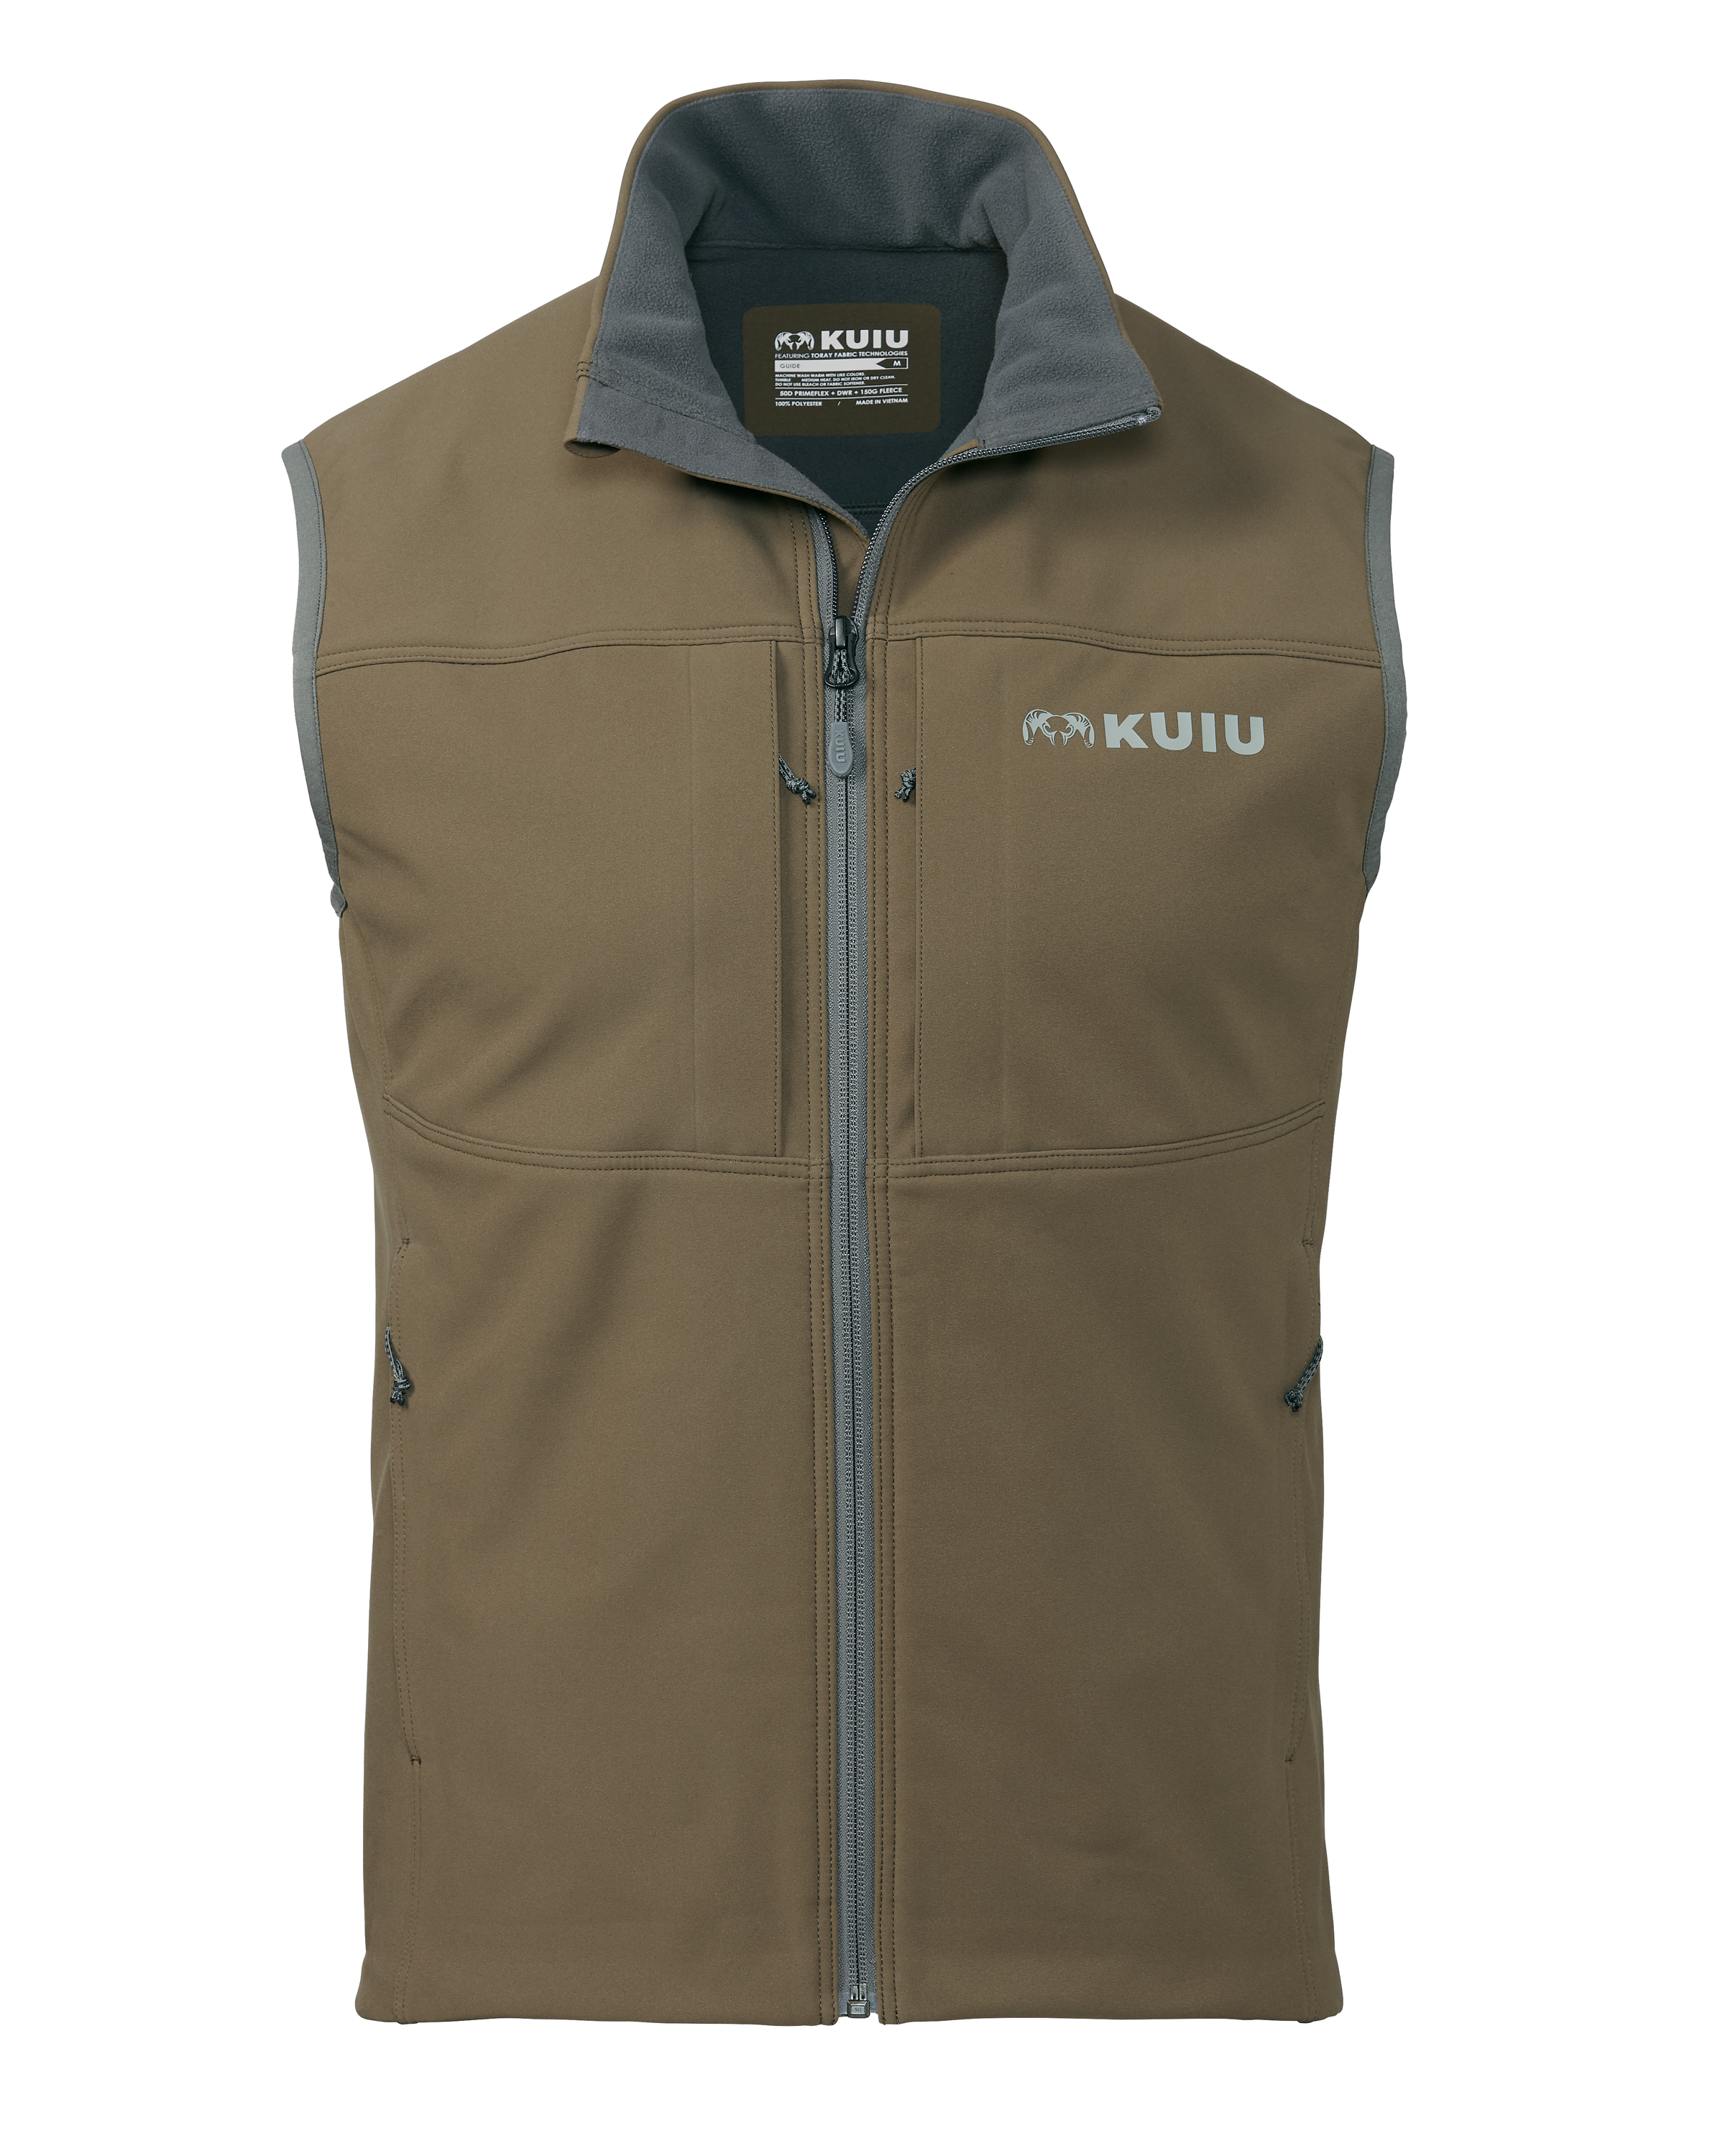 KUIU Guide DCS Hunting Vest in Bourbon | Size 2XL